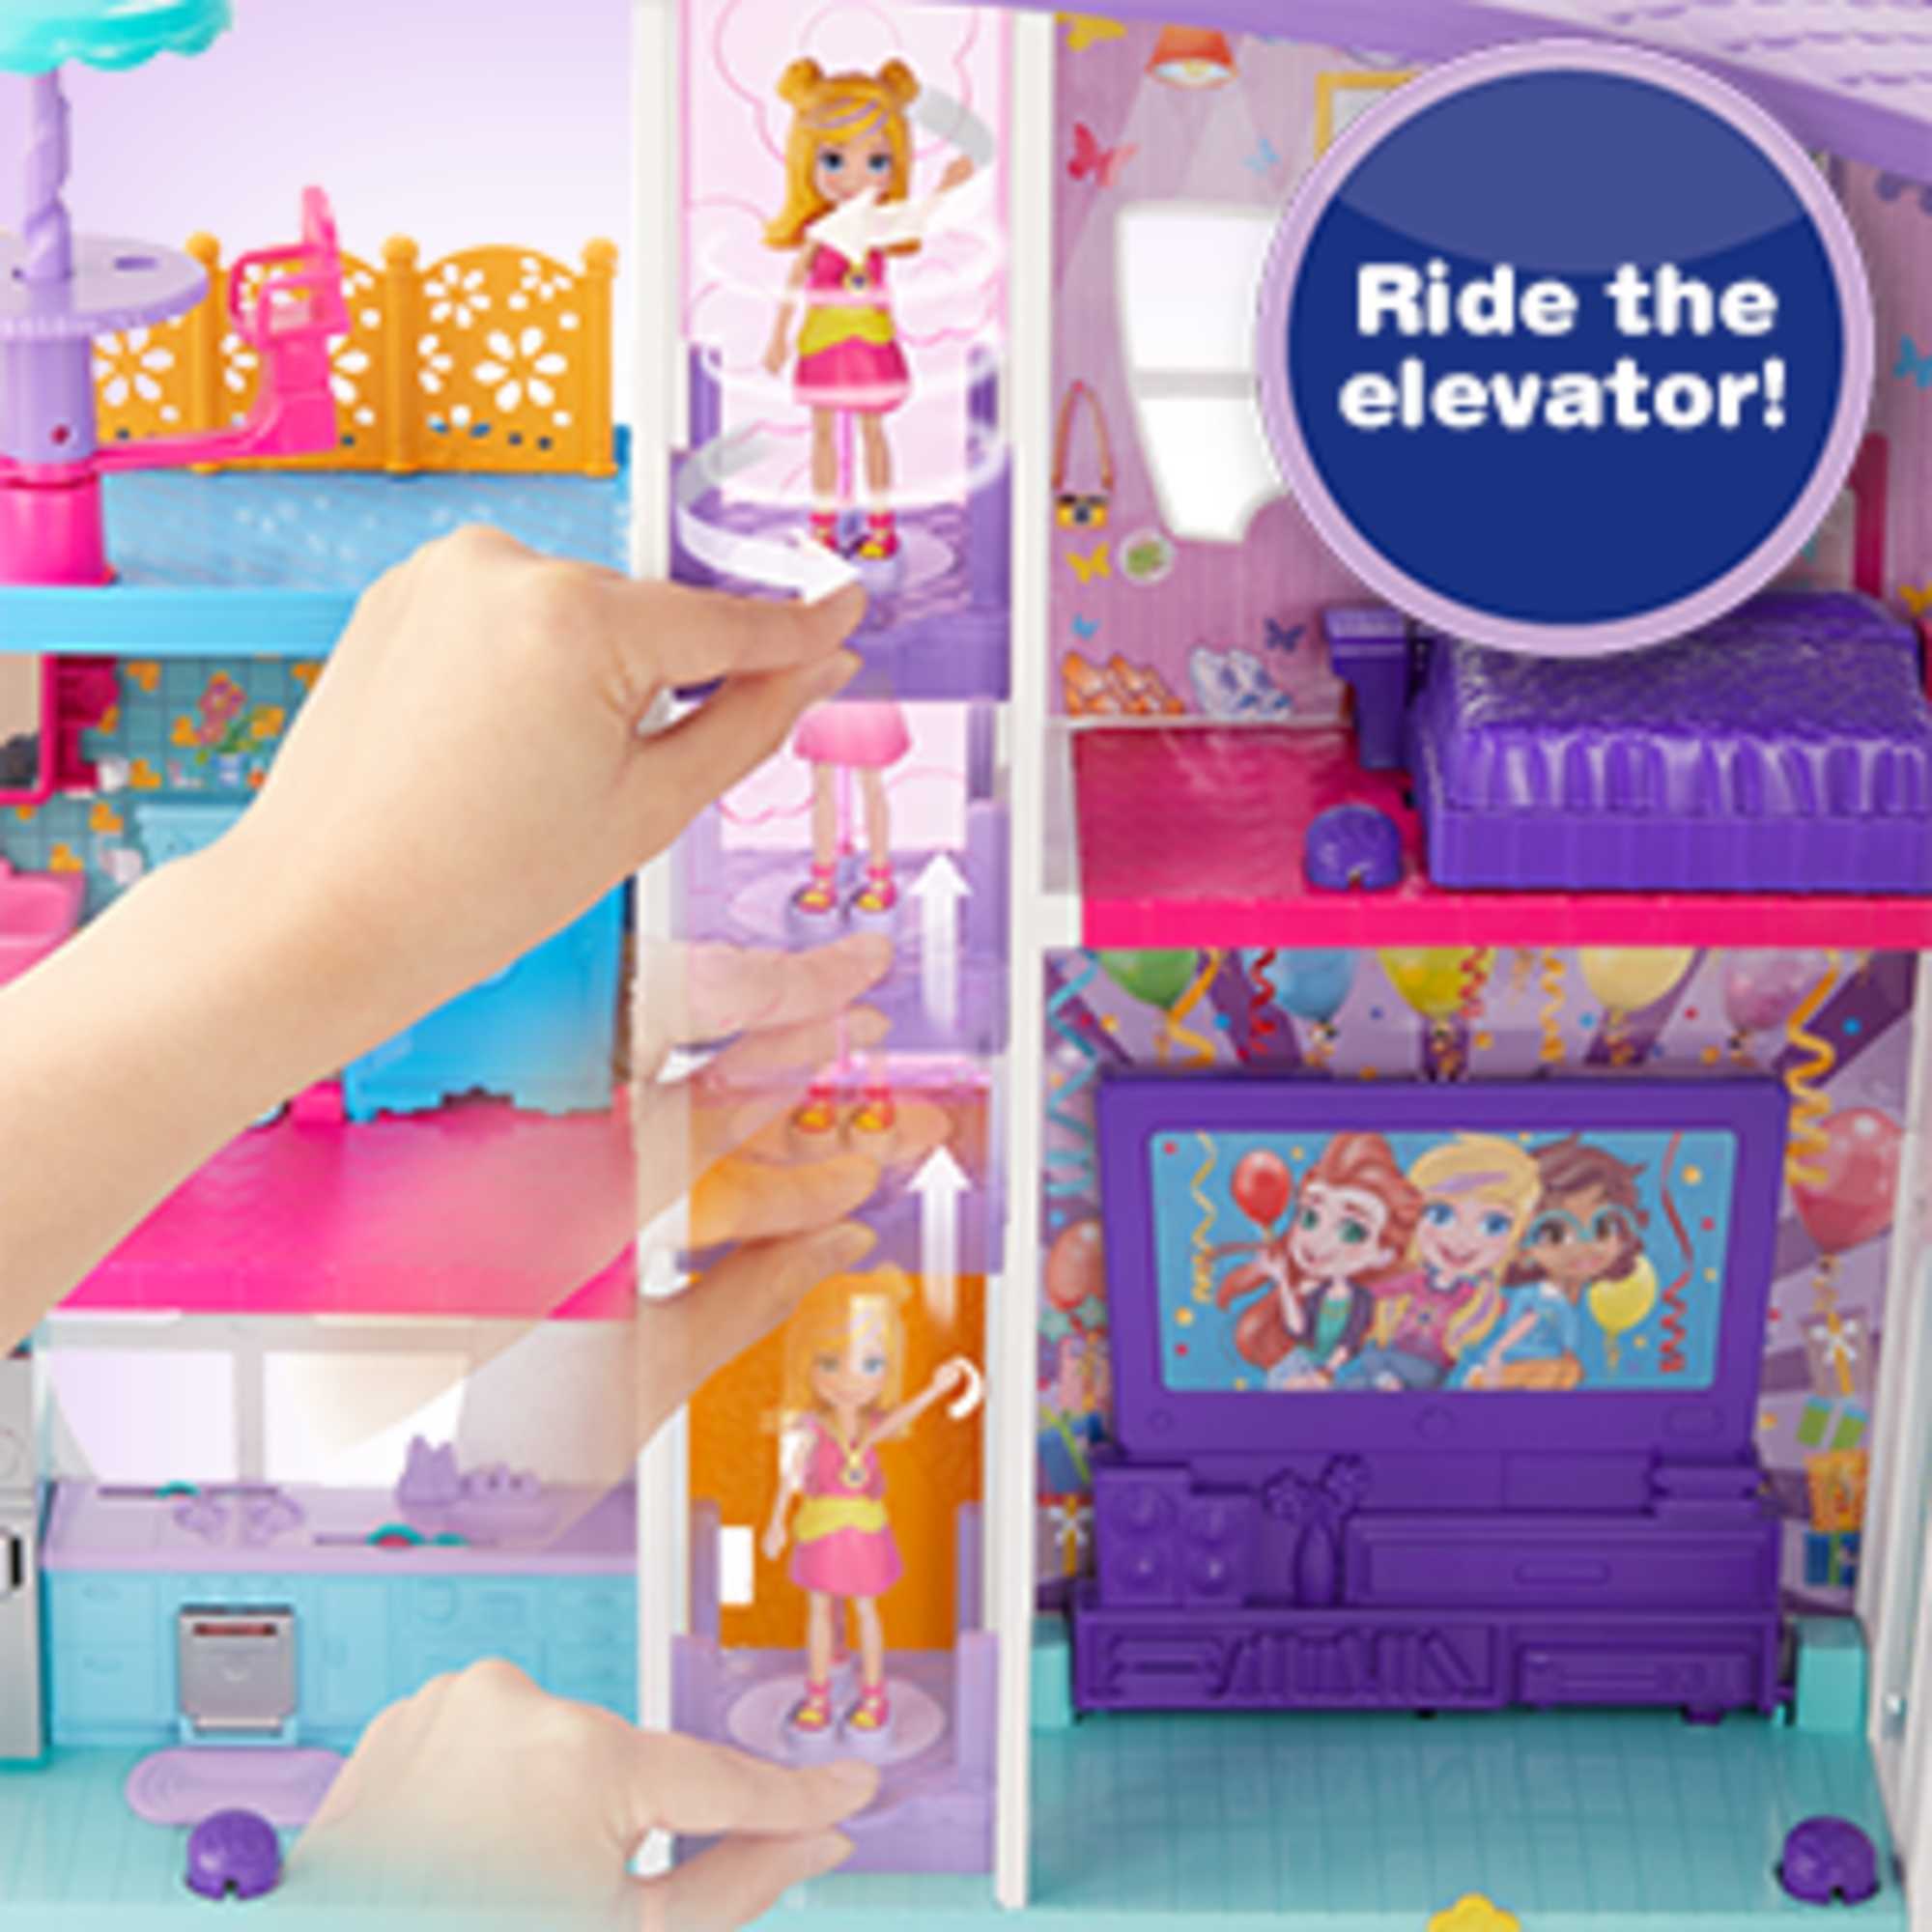 Polly Pocket Poppin' Party Pad Is a Transforming Playhouse! - image 4 of 7